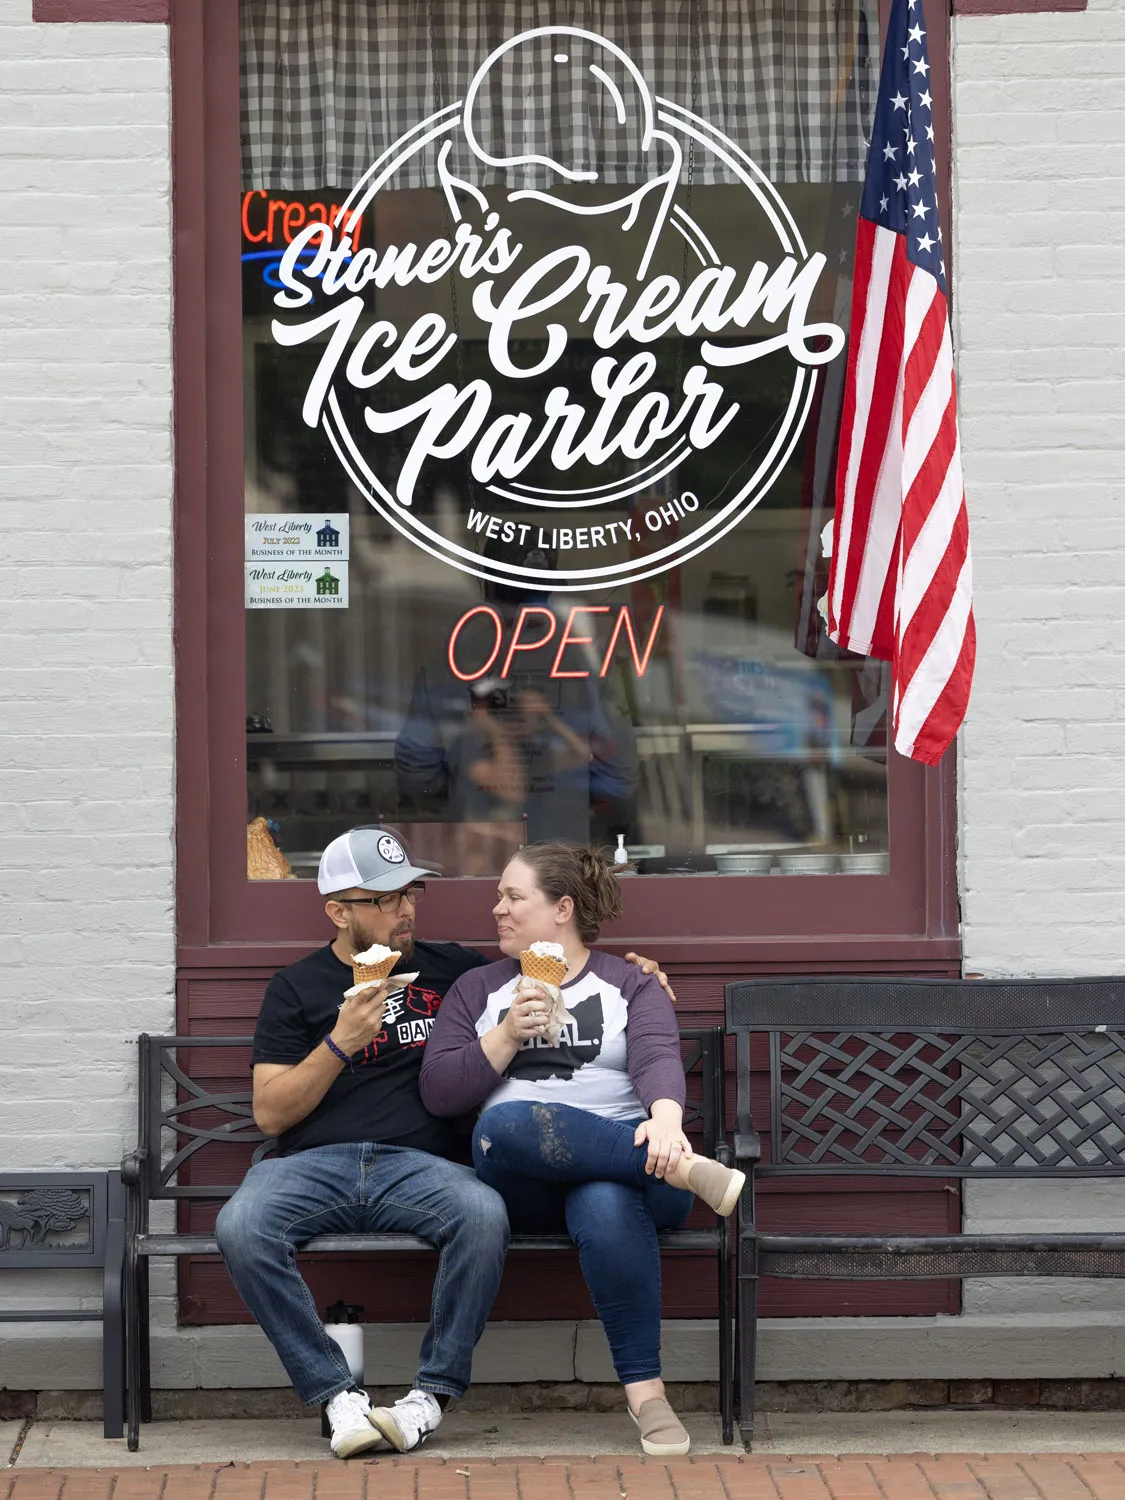 Gretchen Klingler sits with her husband on a bench in front of Stoner’s Ice Cream Parlor in West Liberty, Ohio. The name is painted in script on a huge window behind them, of the white-painted brick building. An American flag is mounted on the window frame. Gretchen and Aaron Gall, a white man with close-cropped beard and hair, both wear T-shirts and jeans and hold waffle cones. They’re looking at each other and smiling. 